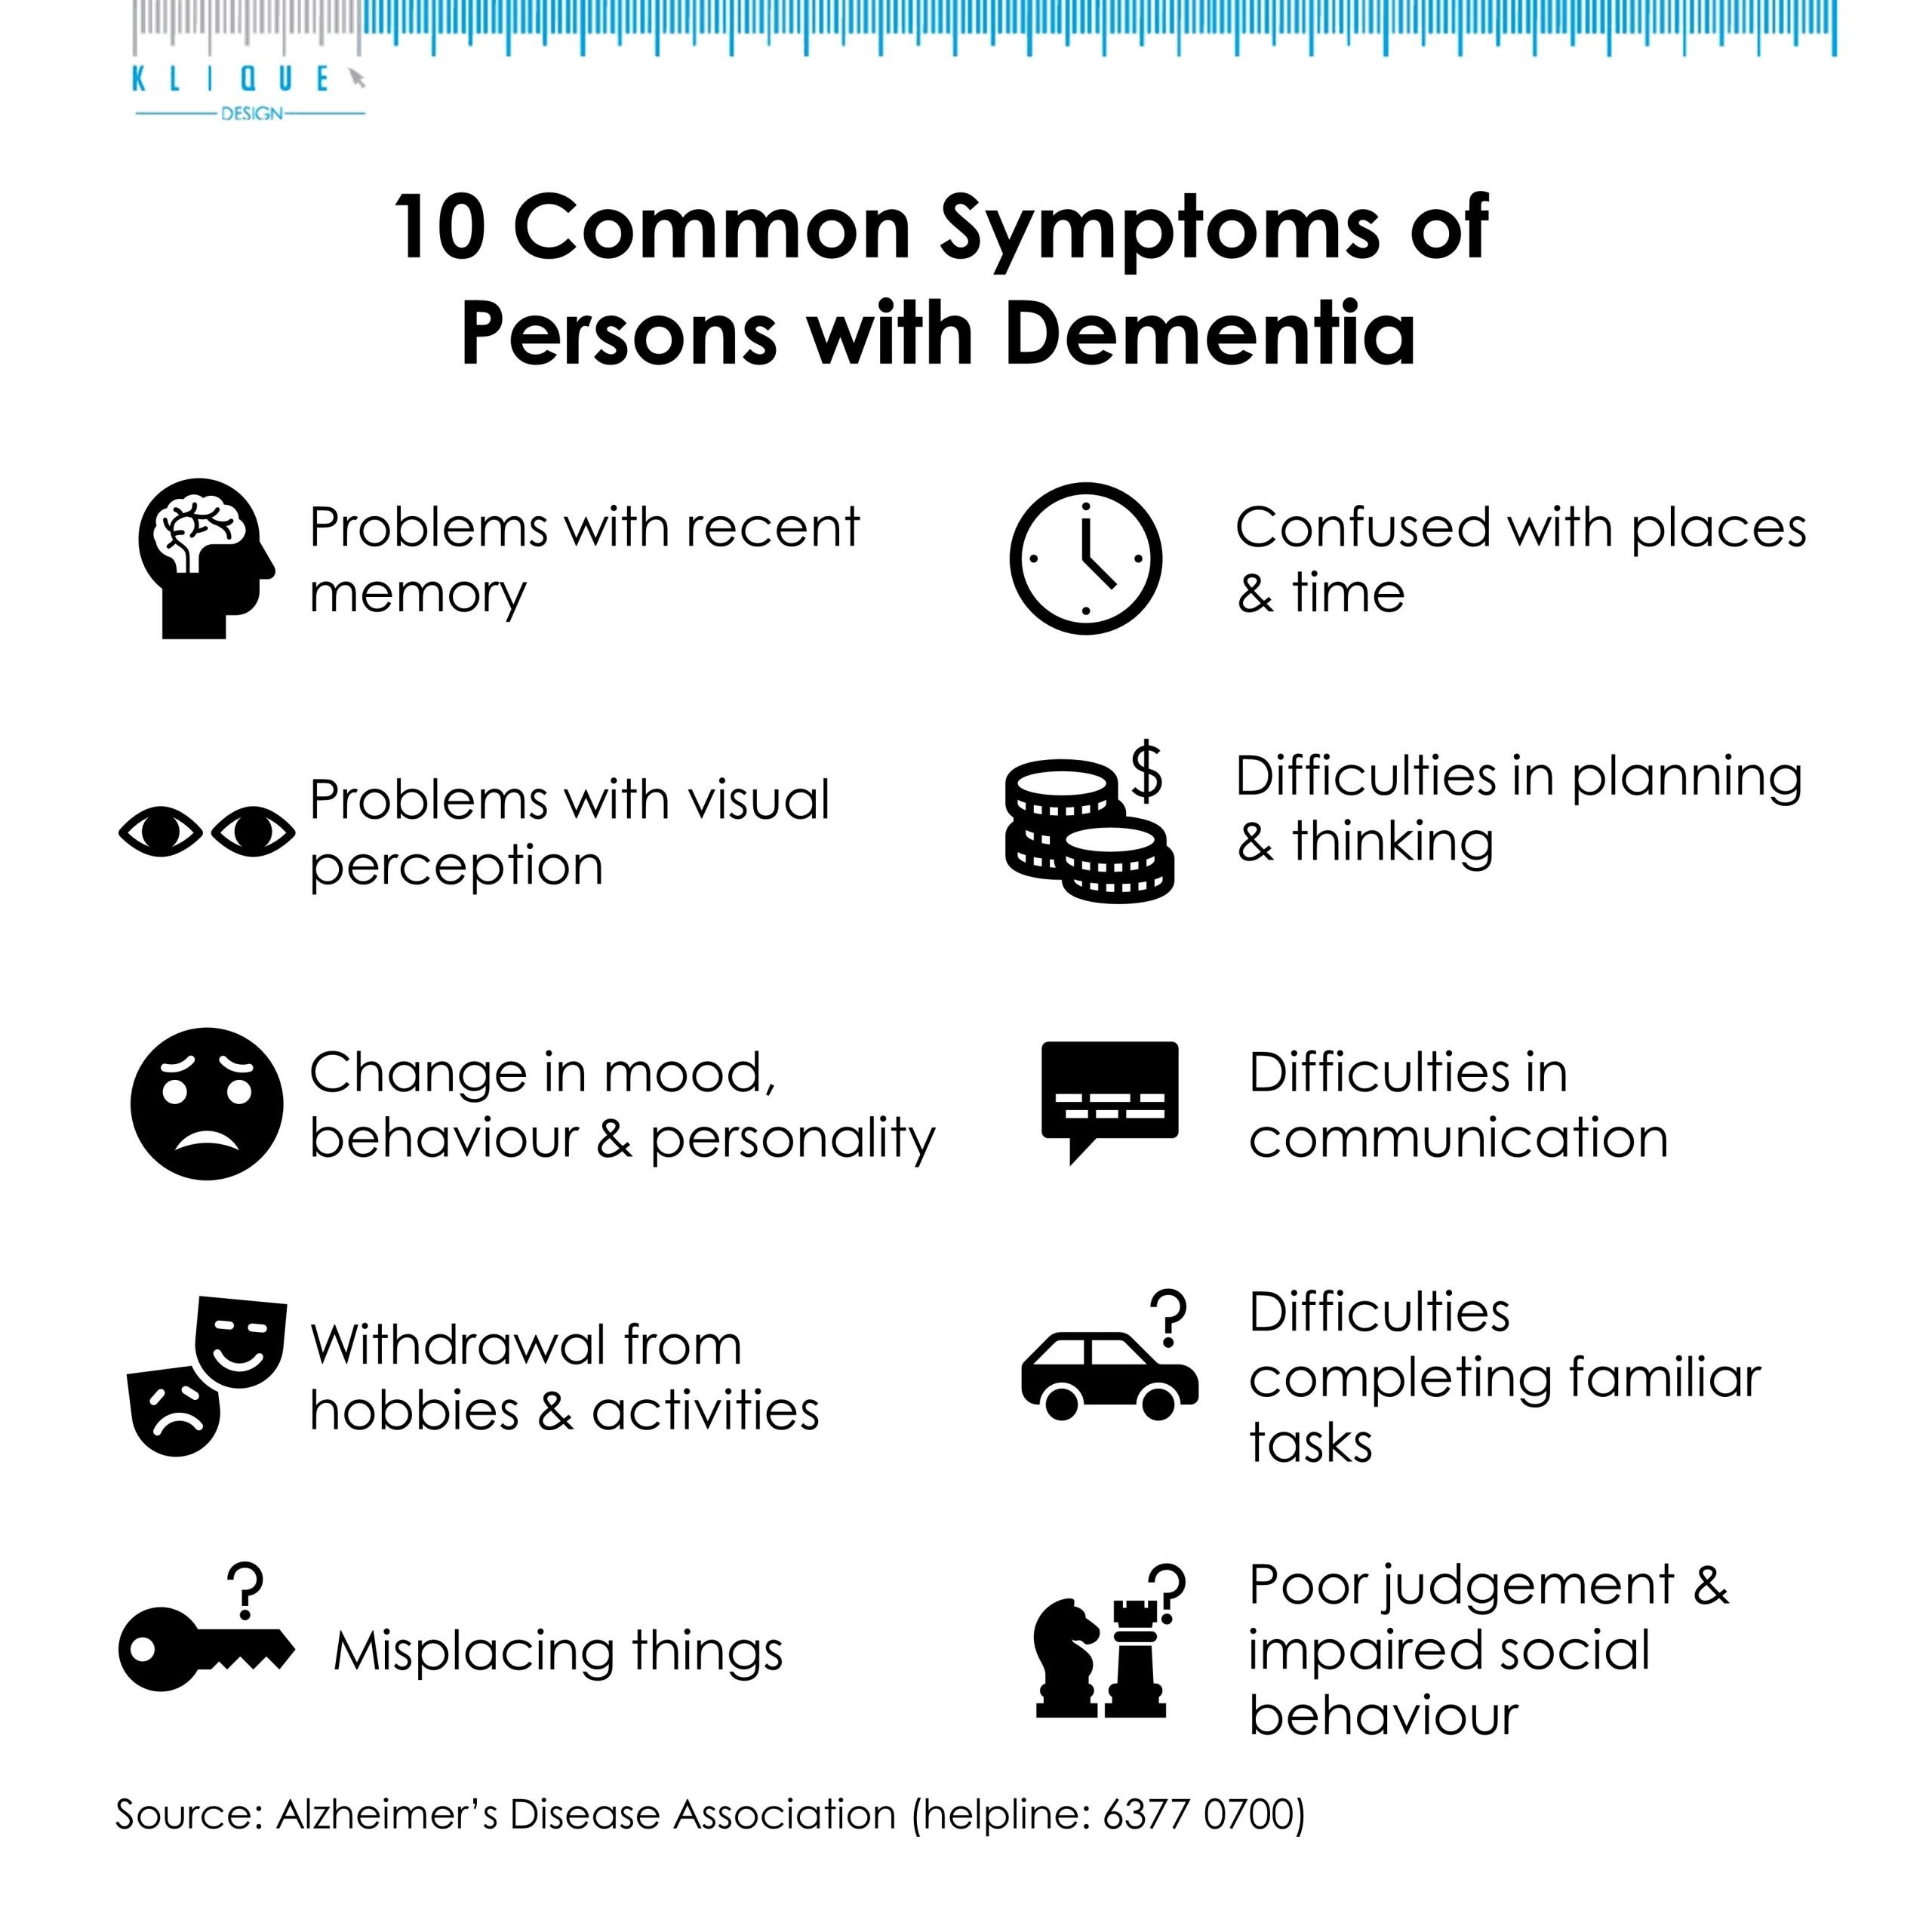 10 Common Symptoms of Persons with Dementia